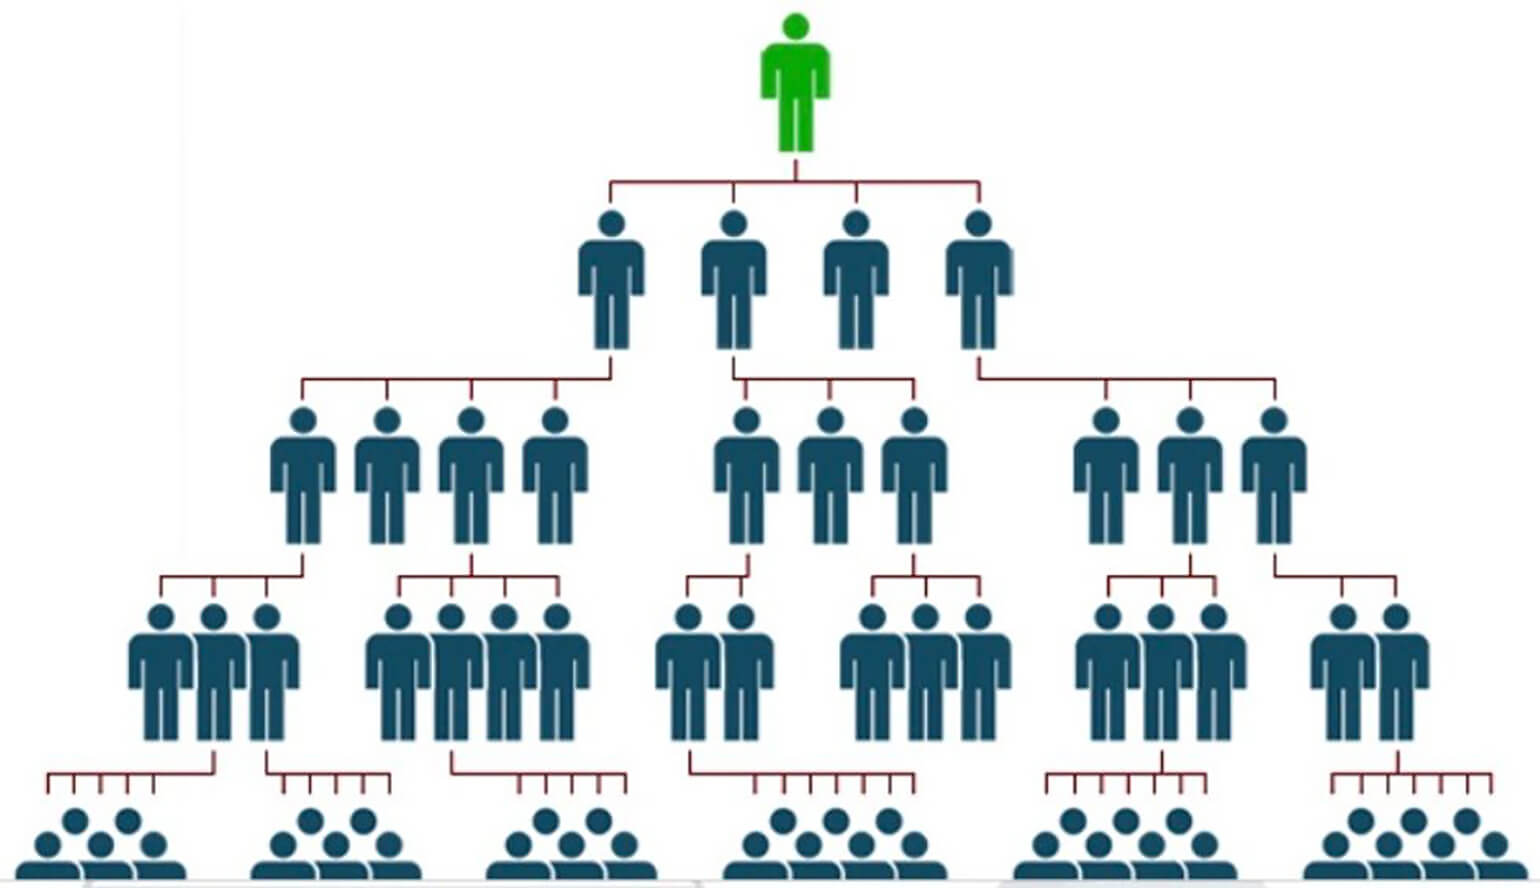 The above image is another chart of how a pyramid scheme looks, but with people instead of levels. The top is an illustration of a green, genderless person. The next row down is comprised of four blue, genderless people. The third row is 10 navy, genderless people. The fourth is contains 17 navy, genderless people. And the final, bottom row has 36 navy, genderless people.